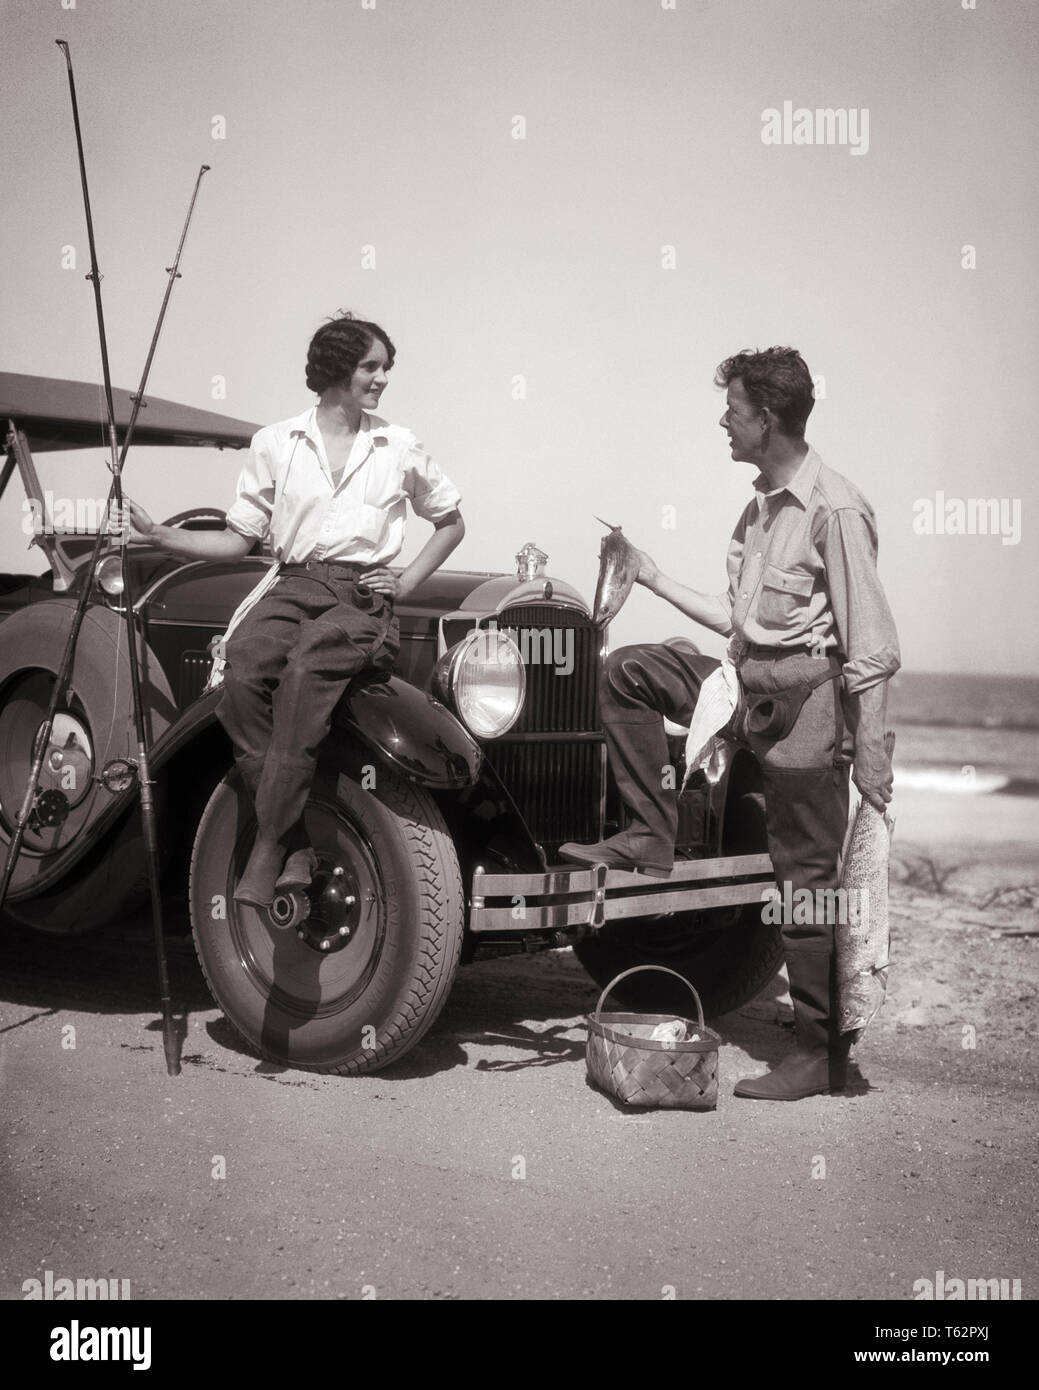 1920s COUPLE SURF FISHING MAN STANDING HOLDING CATCH WOMAN SITTING ON CAR FENDER HOLDING RODS - a3555 HAR001 HARS TRANSPORTATION B&W GOALS HAPPINESS ADVENTURE AUTOS RECREATION AUTOMOBILES VEHICLES ANGLING FENDER MID-ADULT MID-ADULT MAN RODS TOGETHERNESS YOUNG ADULT WOMAN BLACK AND WHITE CAUCASIAN ETHNICITY HAR001 OLD FASHIONED Stock Photo